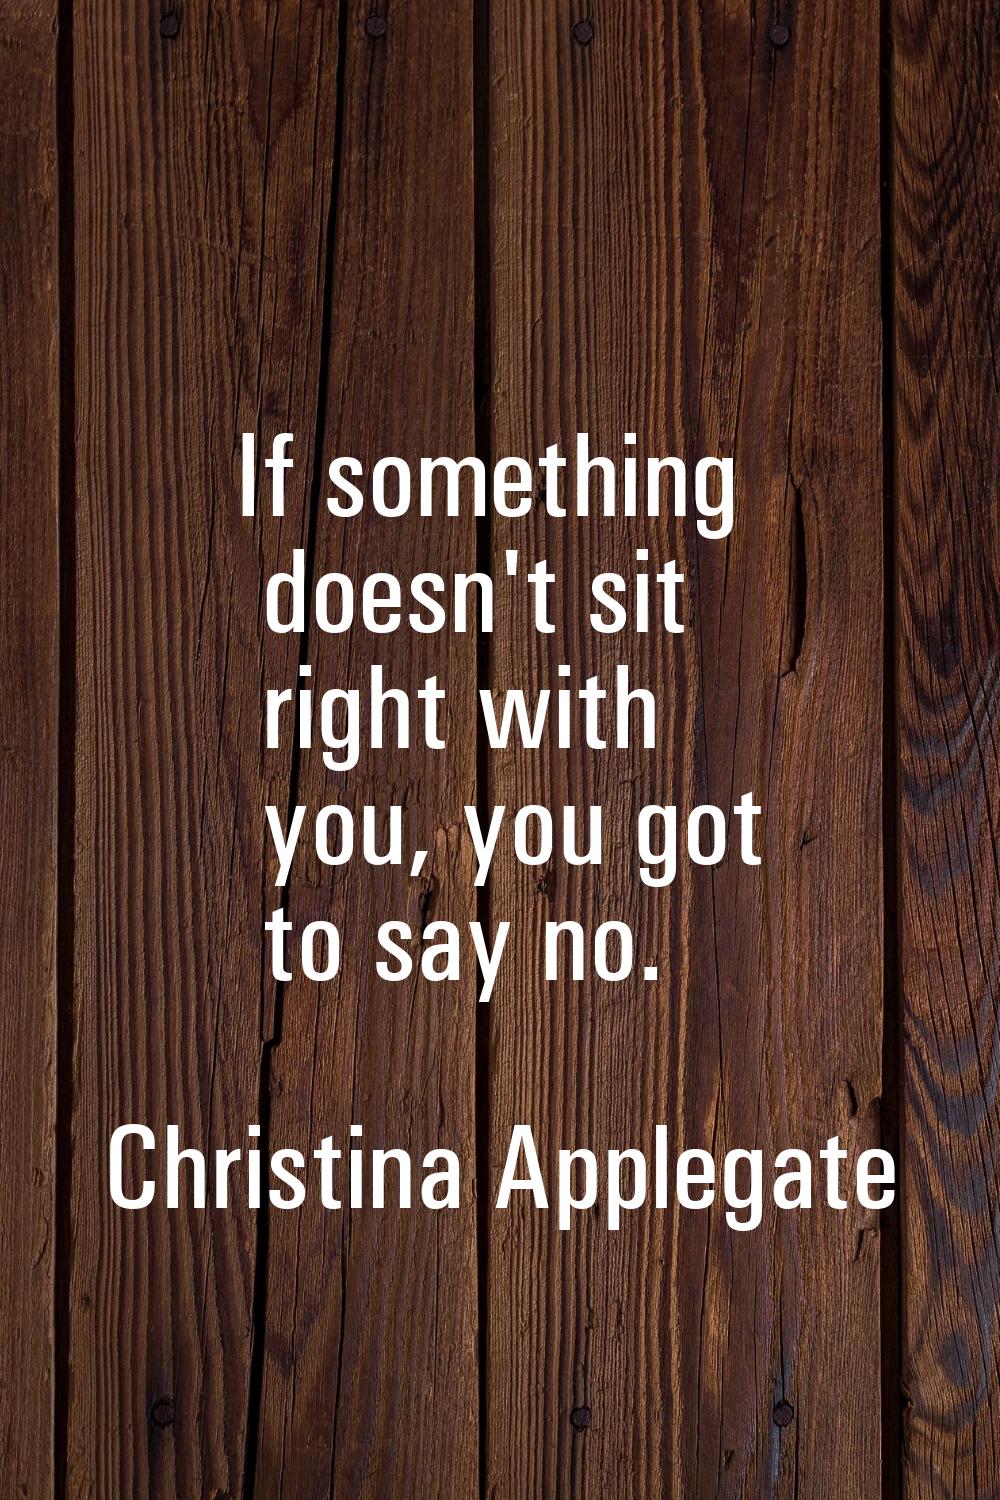 If something doesn't sit right with you, you got to say no.